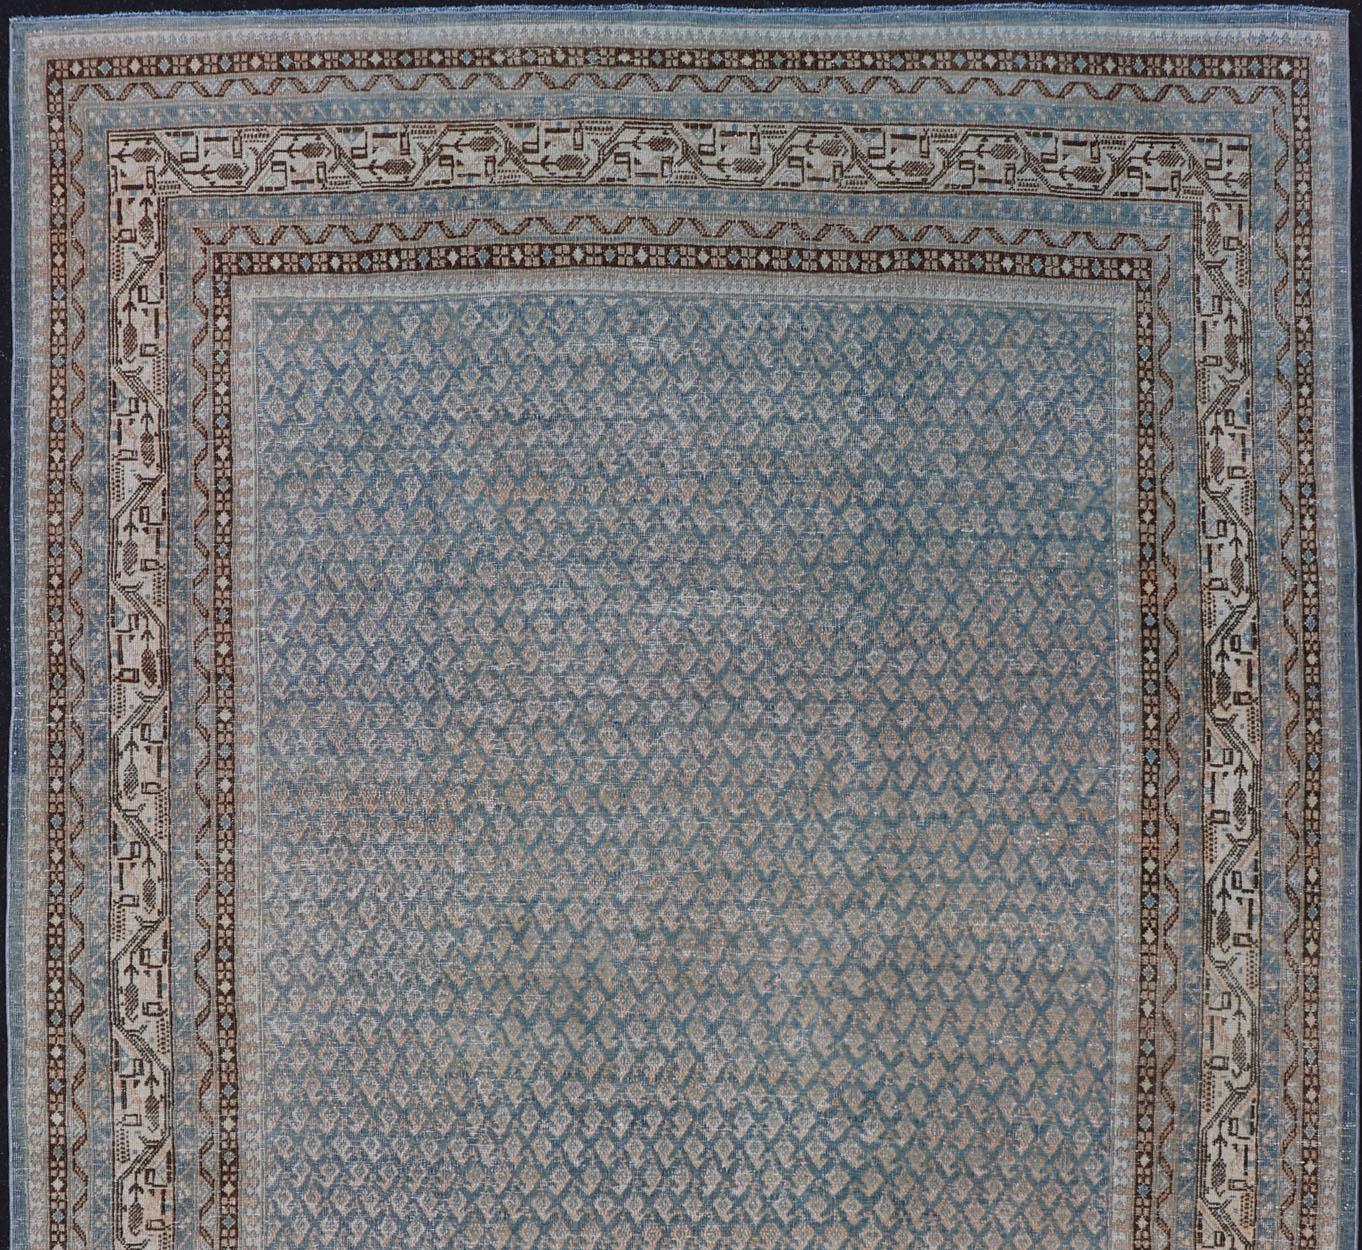 Minimalist antique Persian Tabriz rug with all-over field and light blue, rug EMB-8530-178688, country of origin / type: Iran/ Tabriz, circa 1930.

This Tabriz rug features a relatively intricate and detailed border area and an entirely sparse and